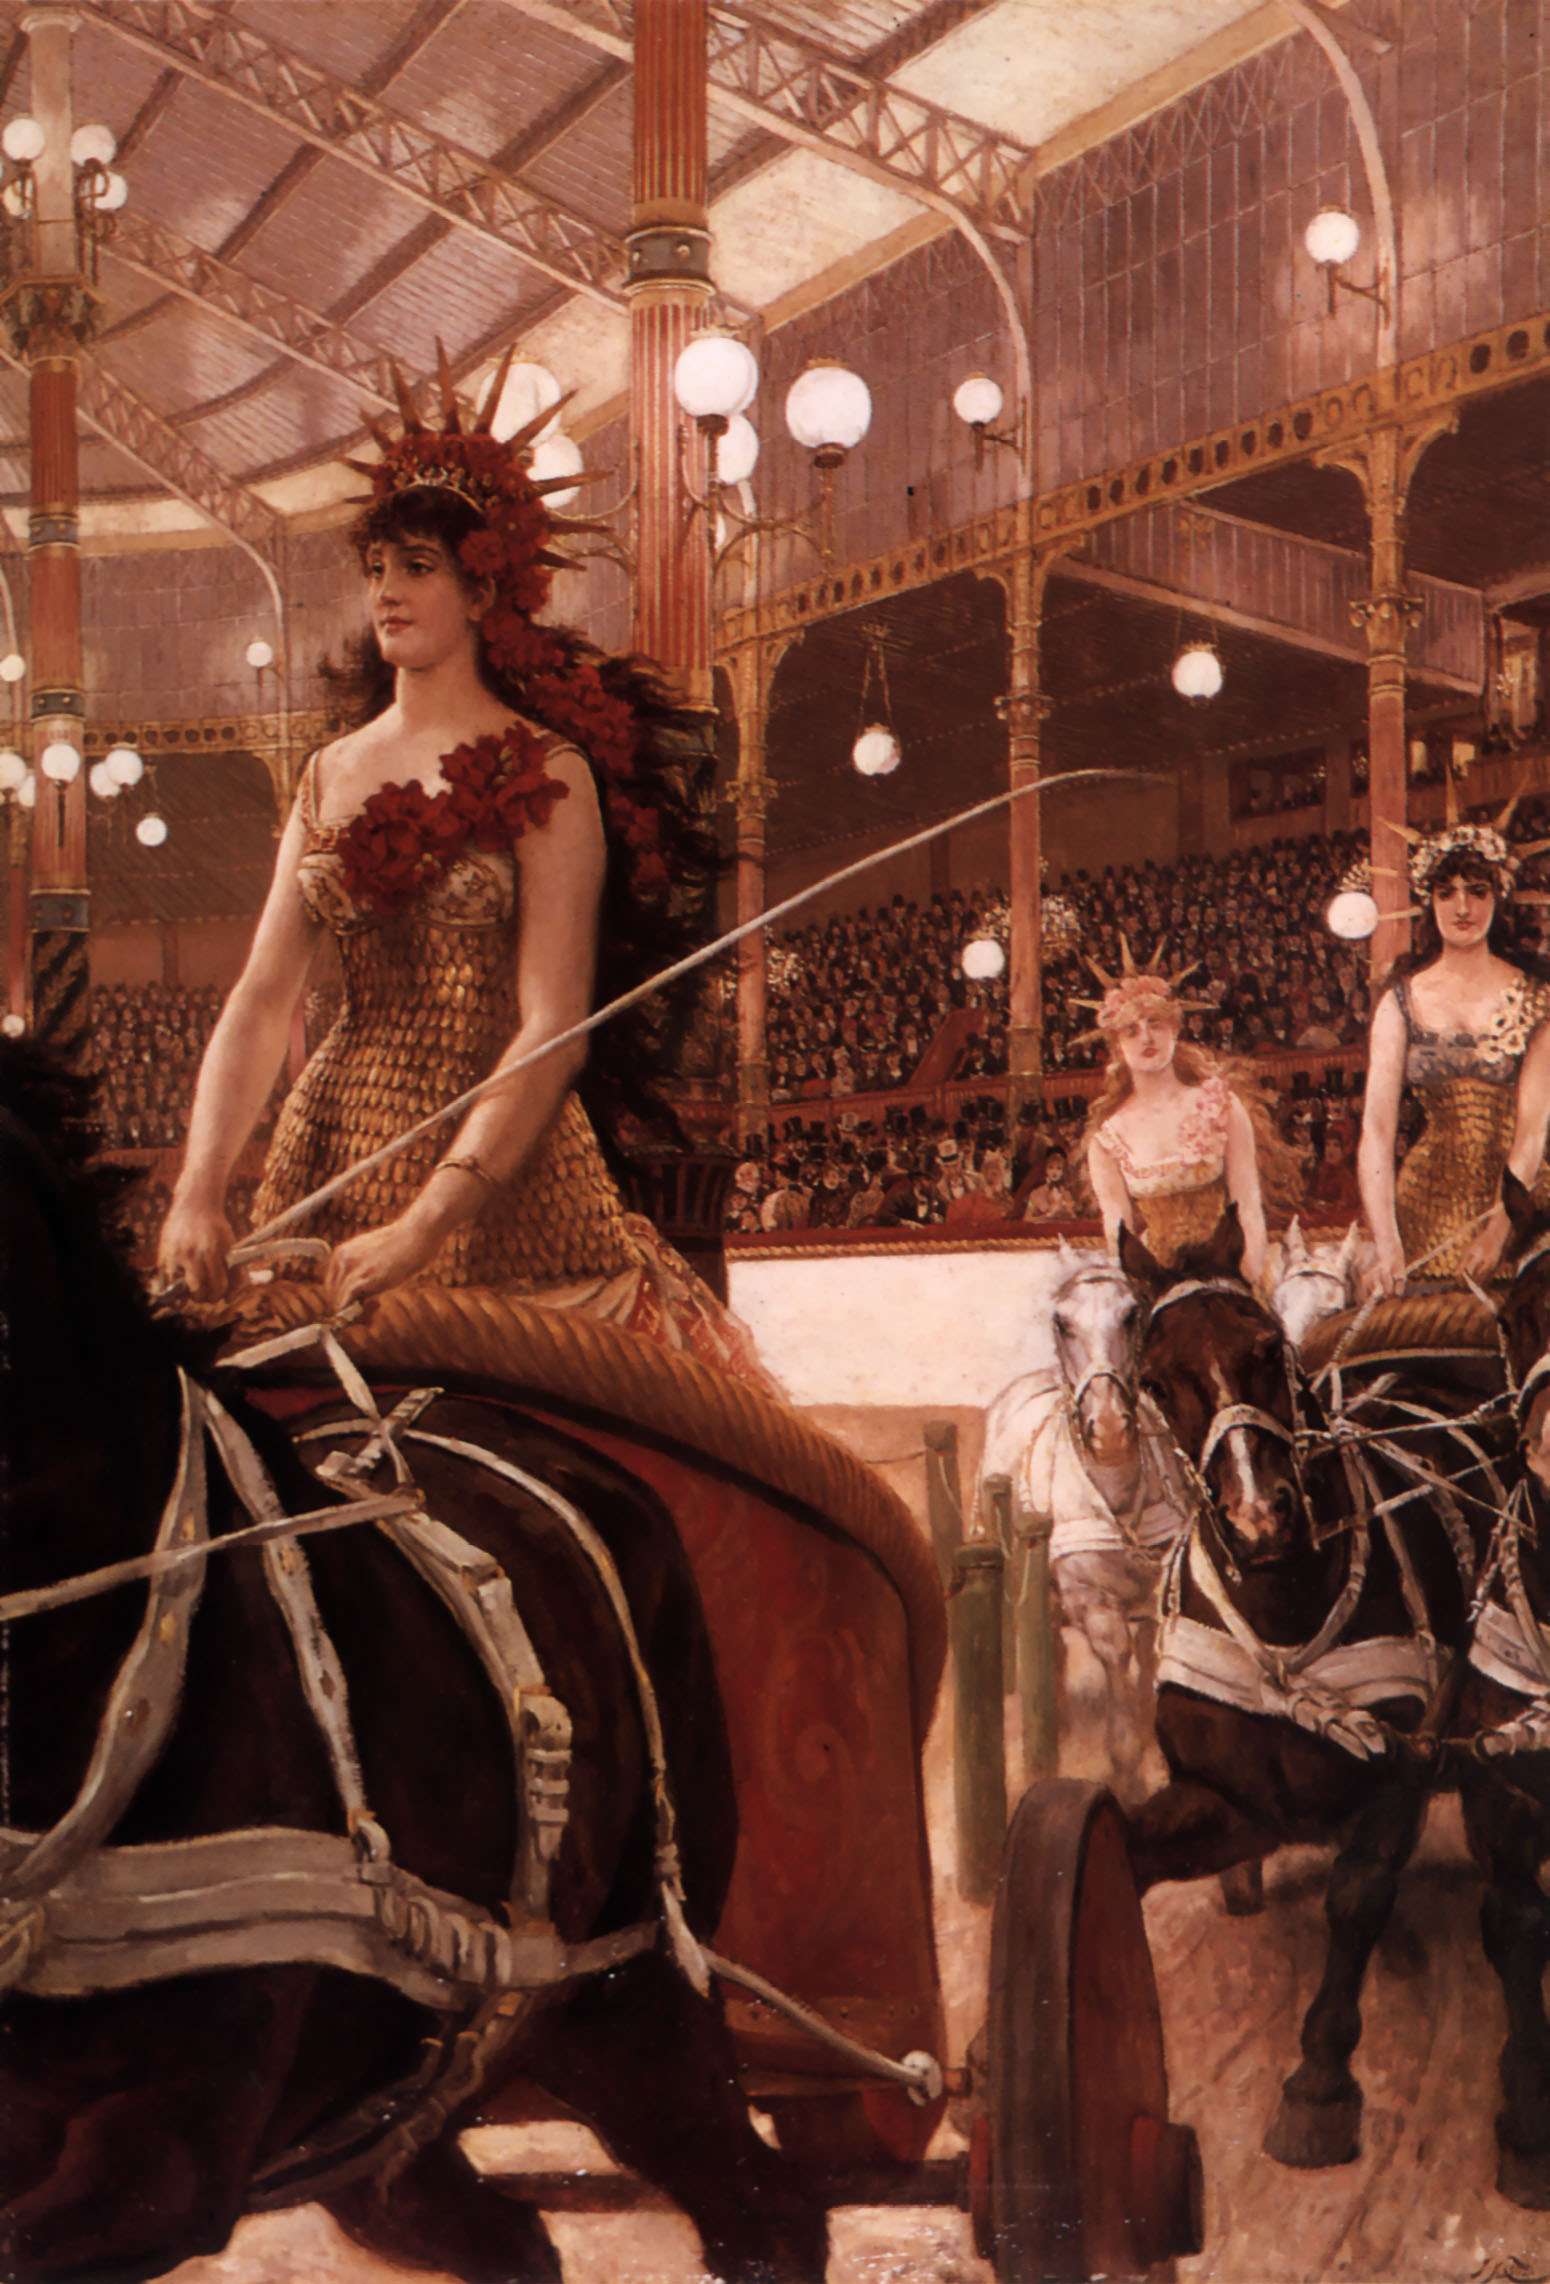 The Ladies of the Cars by James Tissot - 1885 - - private collection